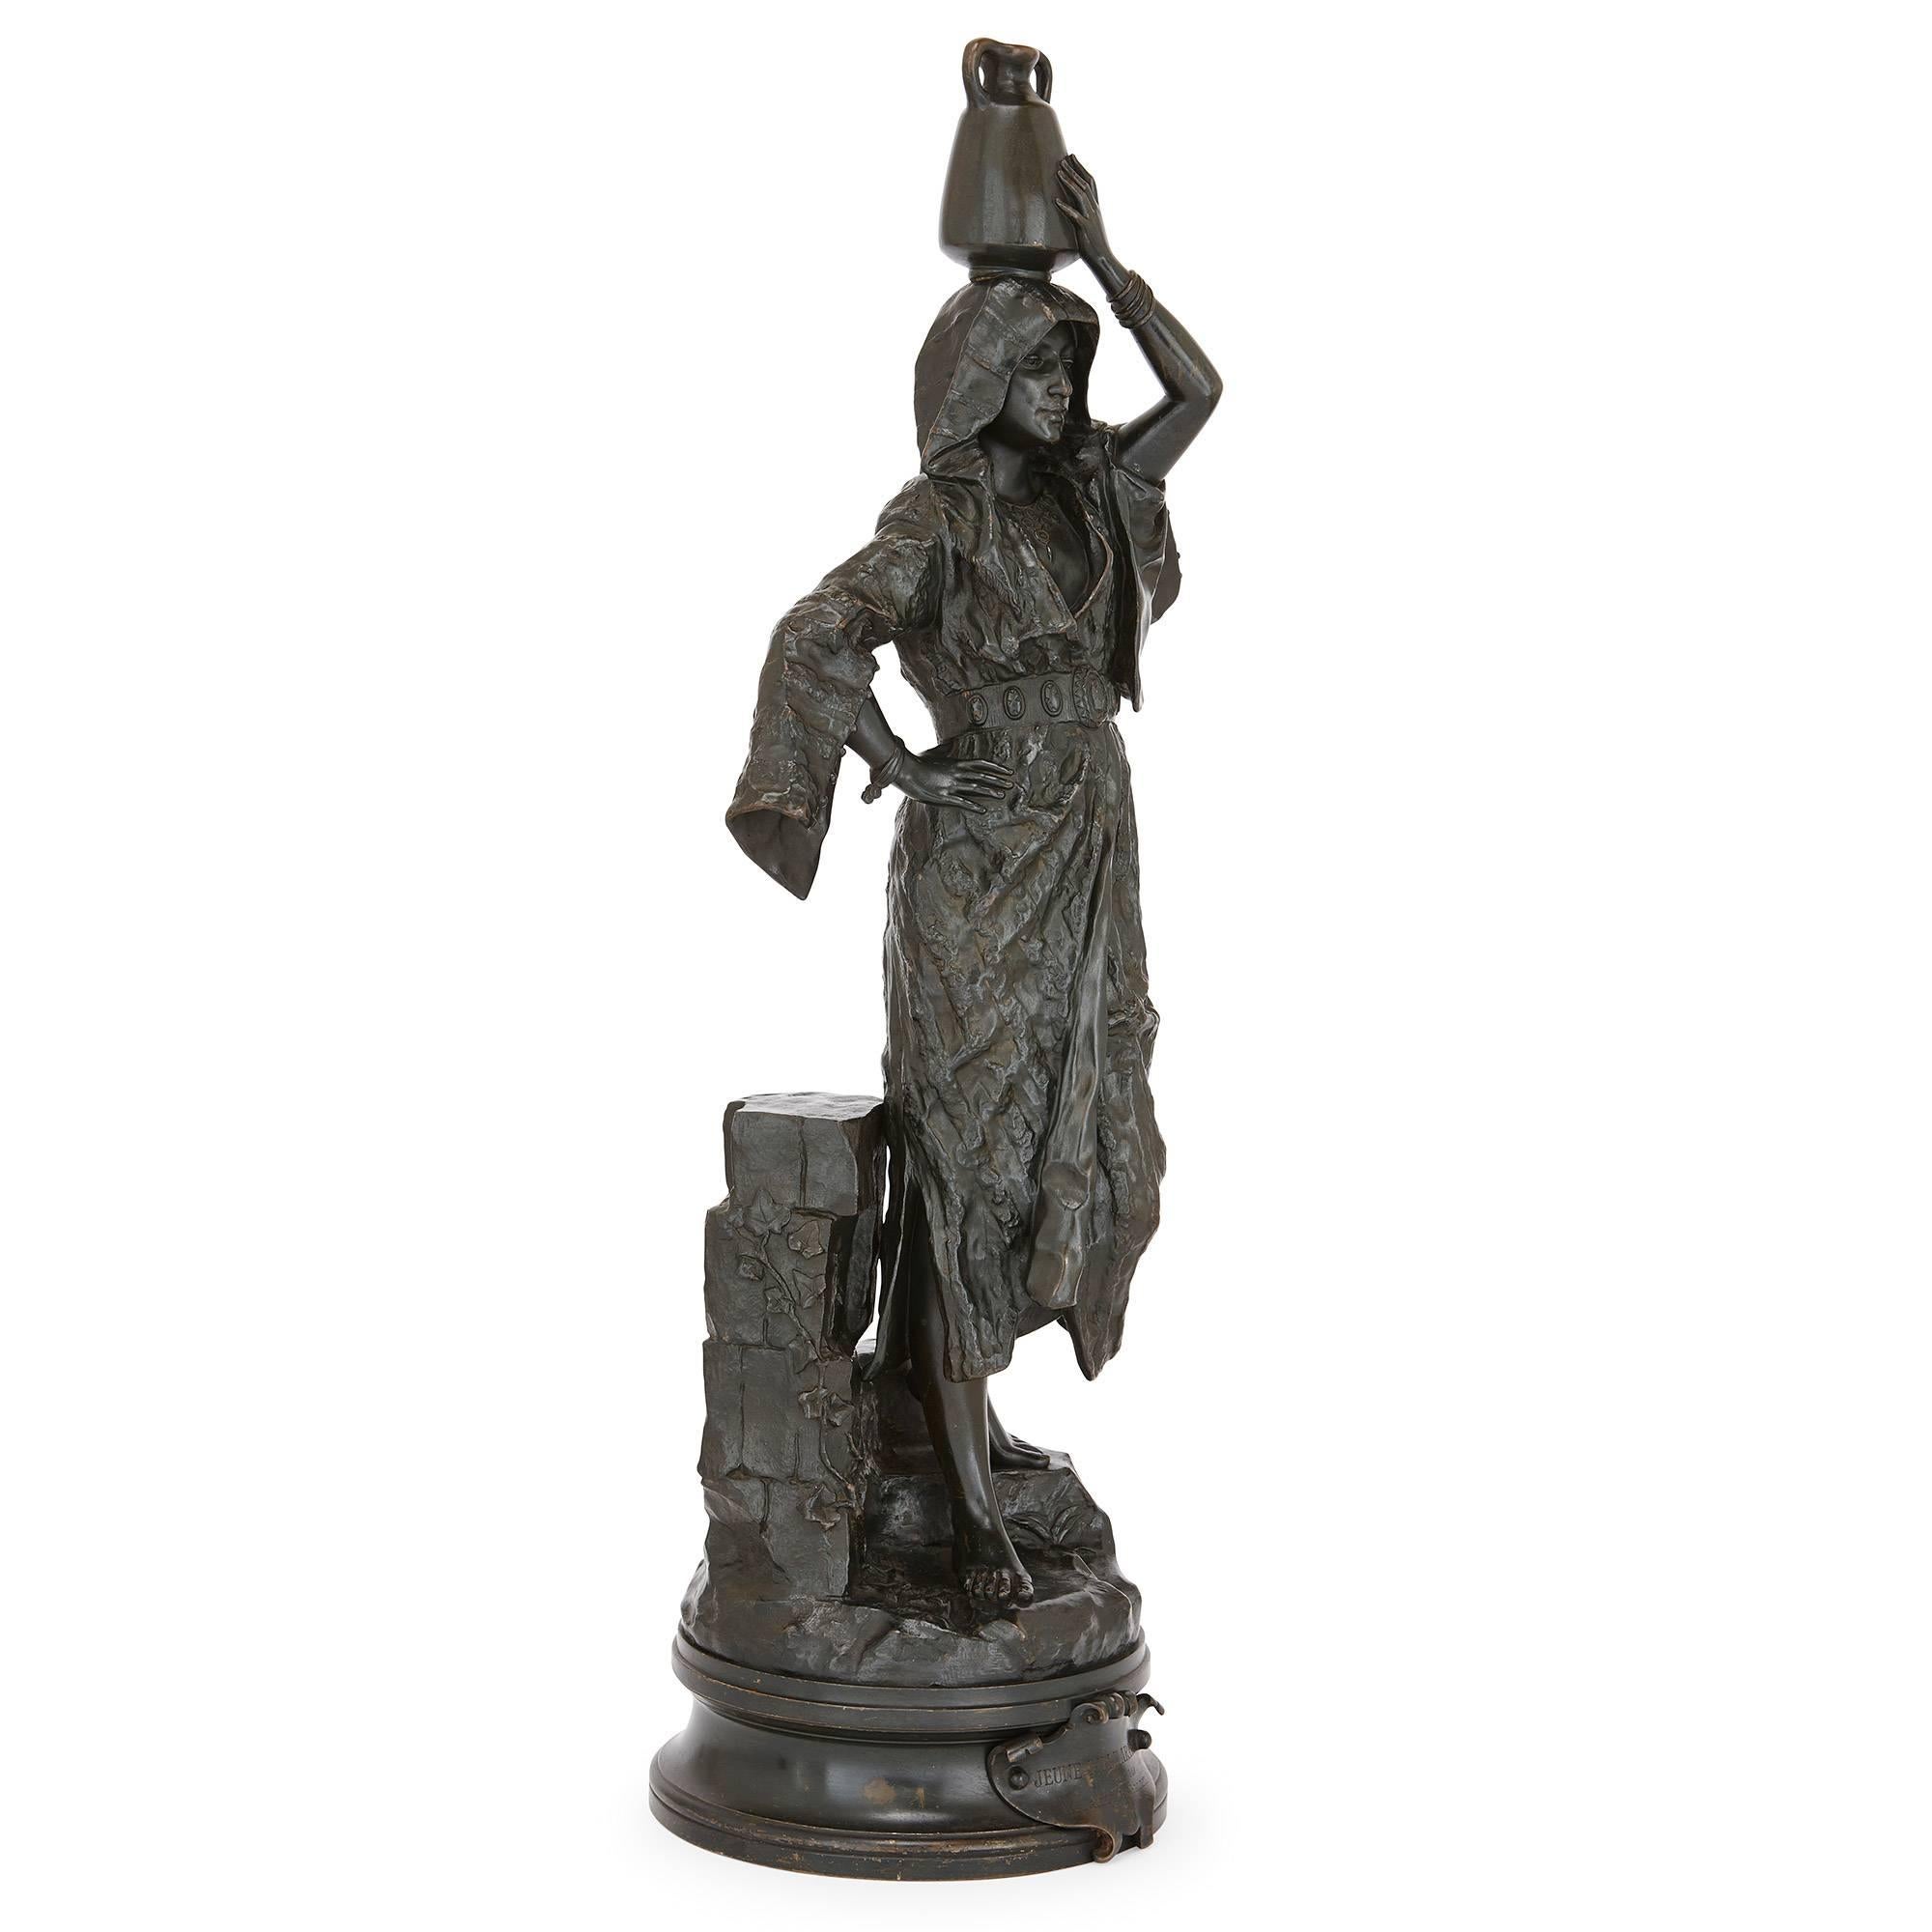 This charming sculpture depicts a young Arabic girl, in typical dress, carrying a jug of water on her head, standing on a natural base and all set on a circular plinth with title plaque. It was created by the French artist Gaston Leroux who was